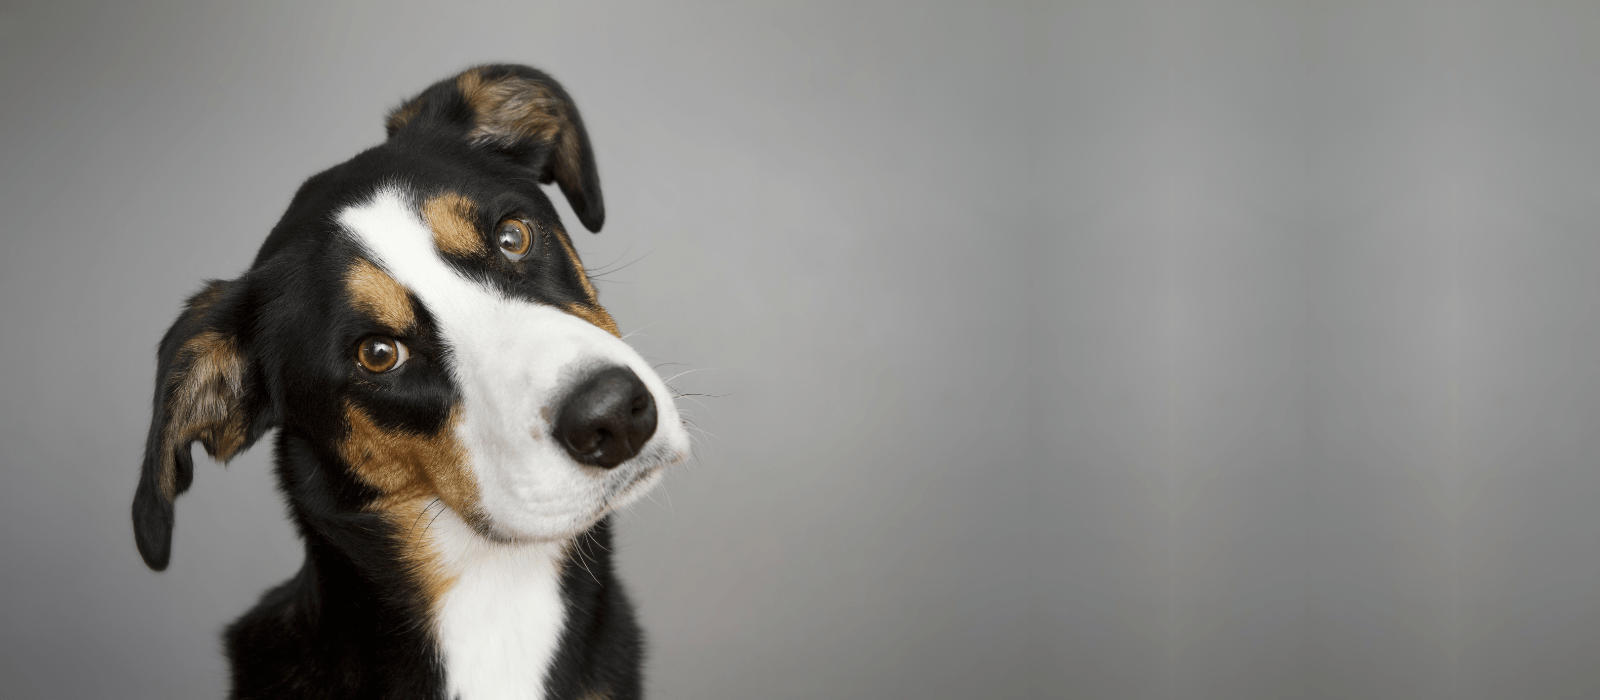 A brown, black and white dog in front of a grey background looking at the camera with their head tilted to the right.